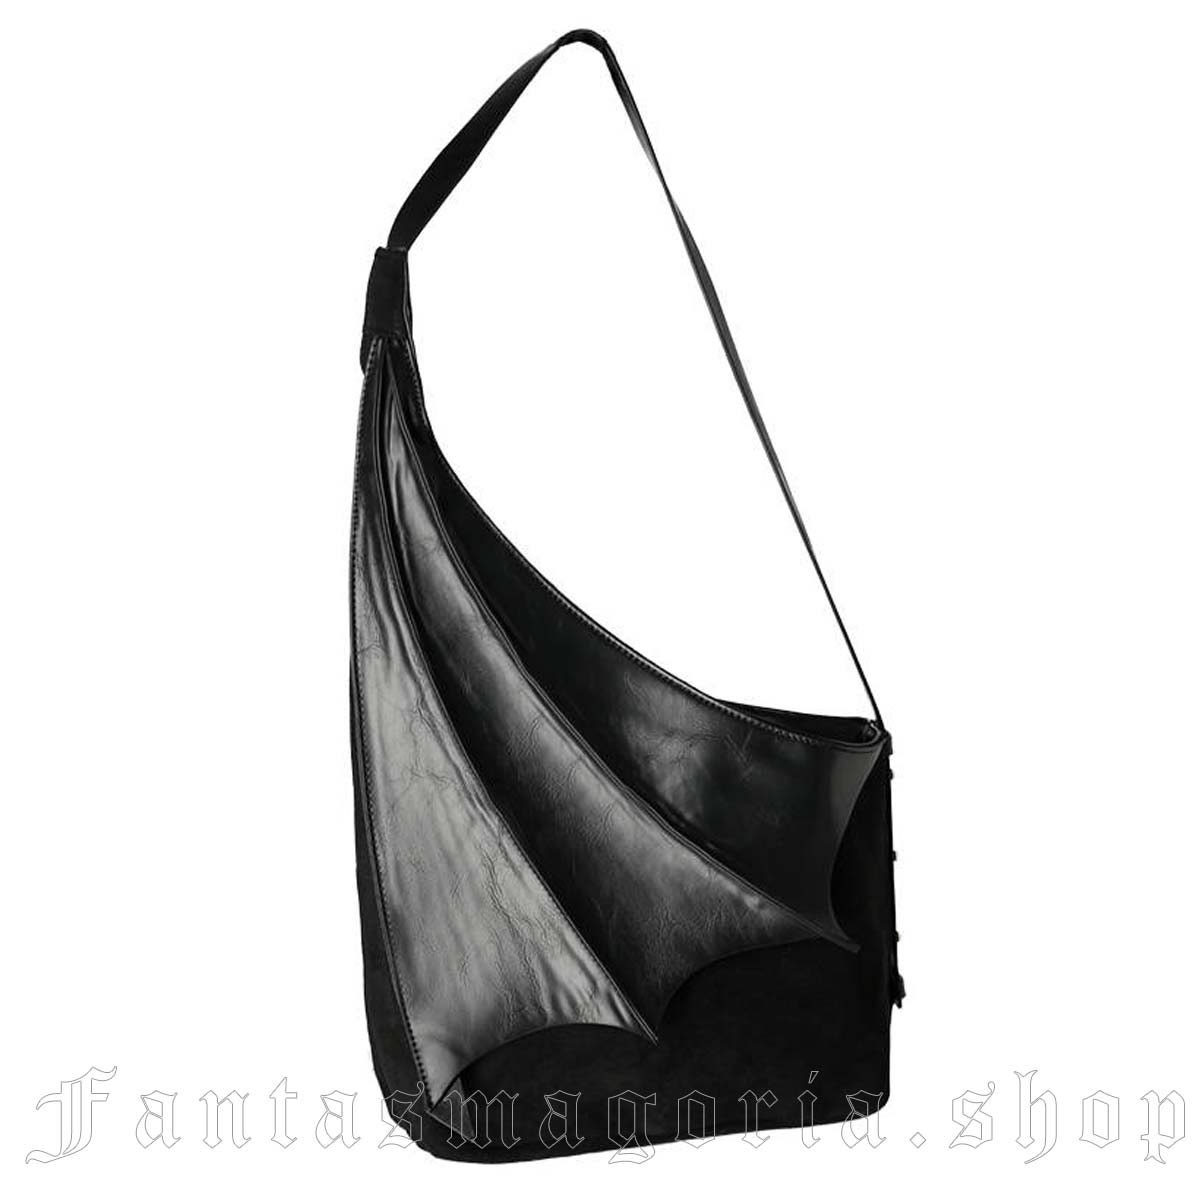 Winged Hobo Bag - Restyle - 5900949916040 1